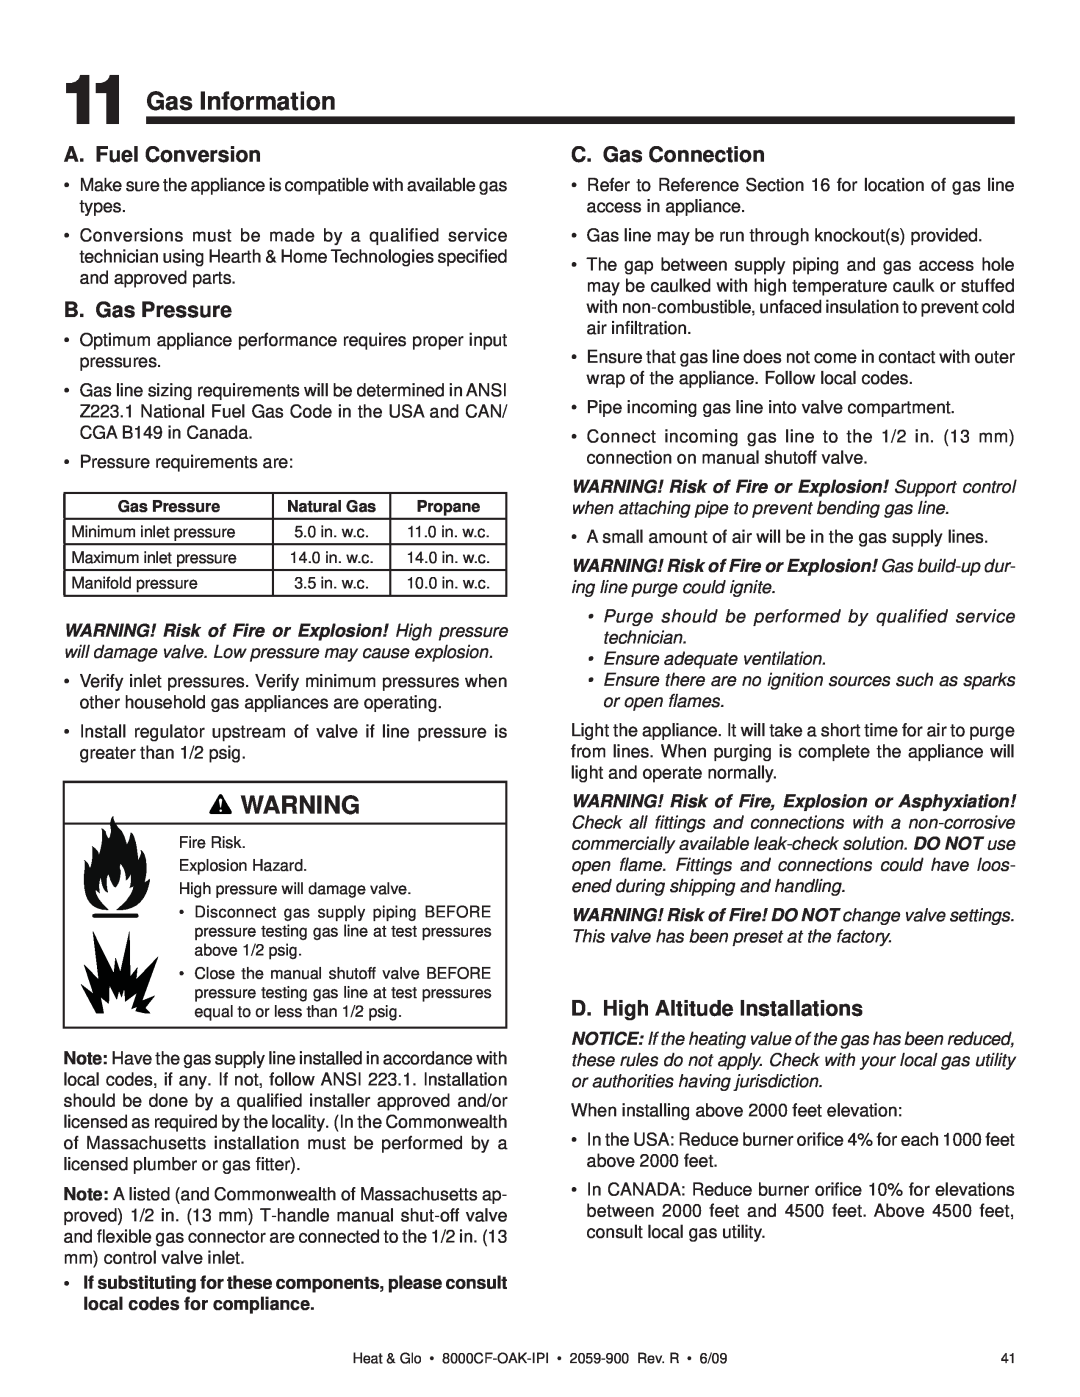 Heat & Glo LifeStyle 8000CF-OAK-IPI owner manual Gas Information, A. Fuel Conversion, B. Gas Pressure, C. Gas Connection 